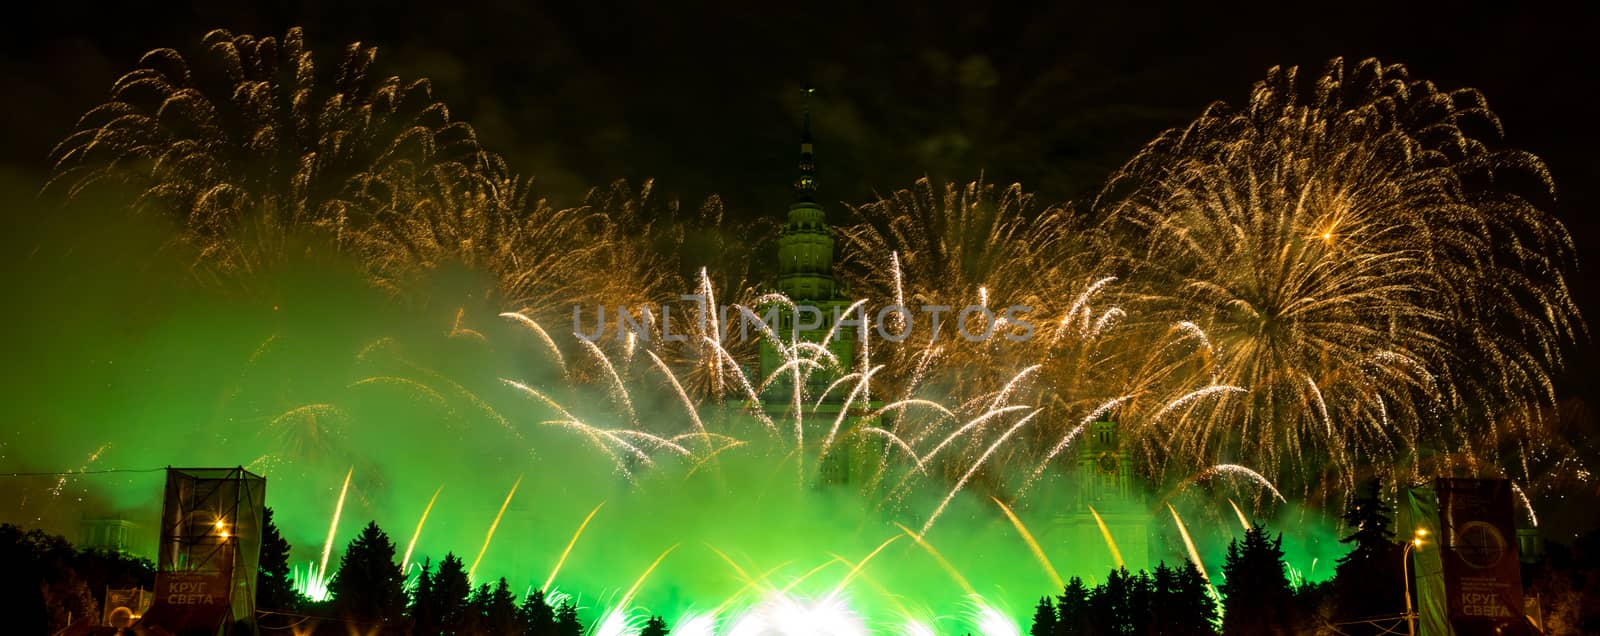 Moscow, Russia - September 25, 2016: Fireworks at the festival "Circle of Light" on the background of the Lomonosov Moscow State University